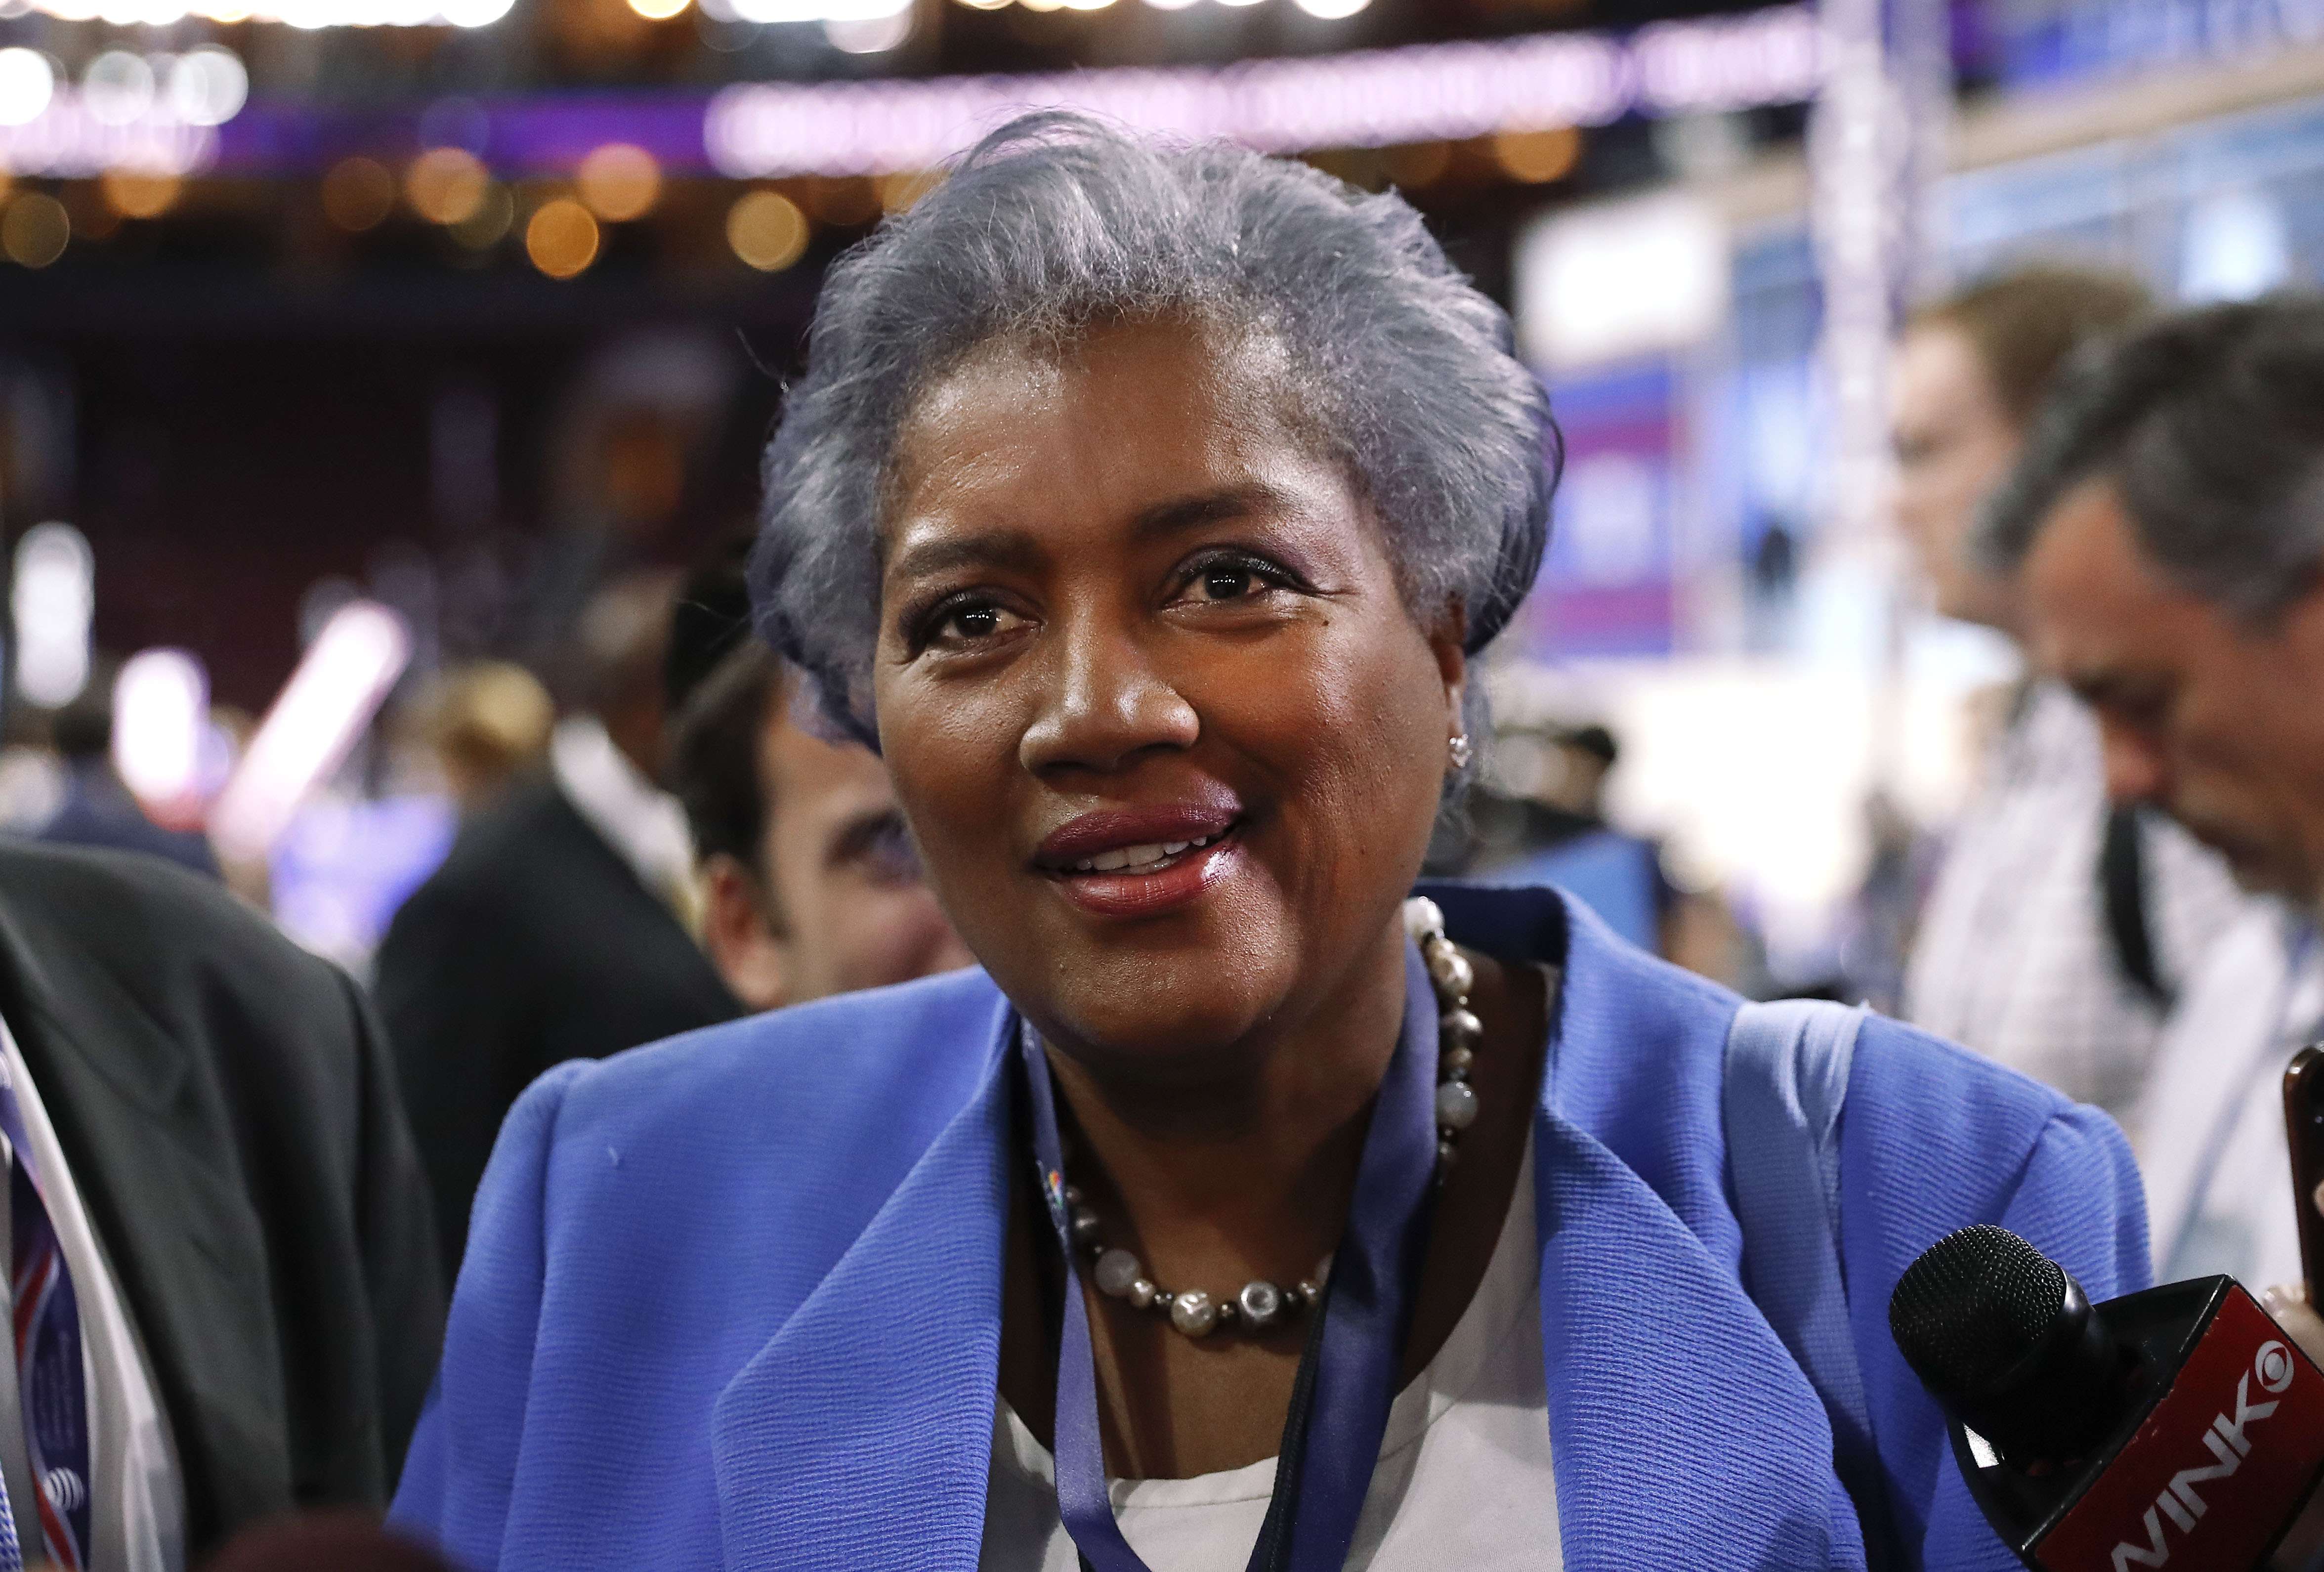 Donna Brazile, interim chair of the Democratic National Committee, has departed CNN after the network learned that she contacted the Clinton campaign ahead of time about a question that would be posed during a presidential primary town hall last March. Photo: AP